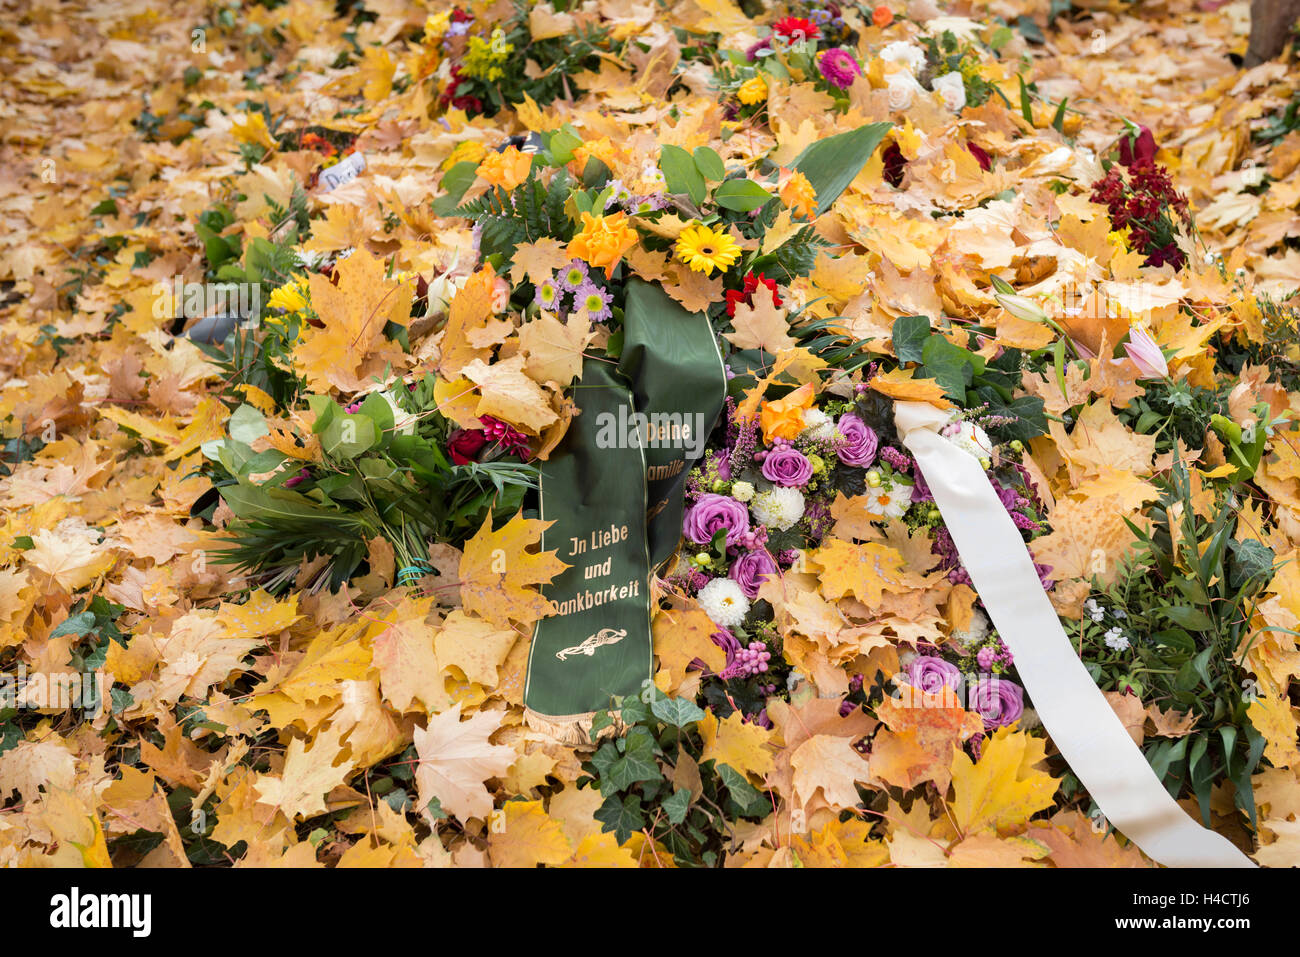 Tomb in autumn with mourning band Stock Photo